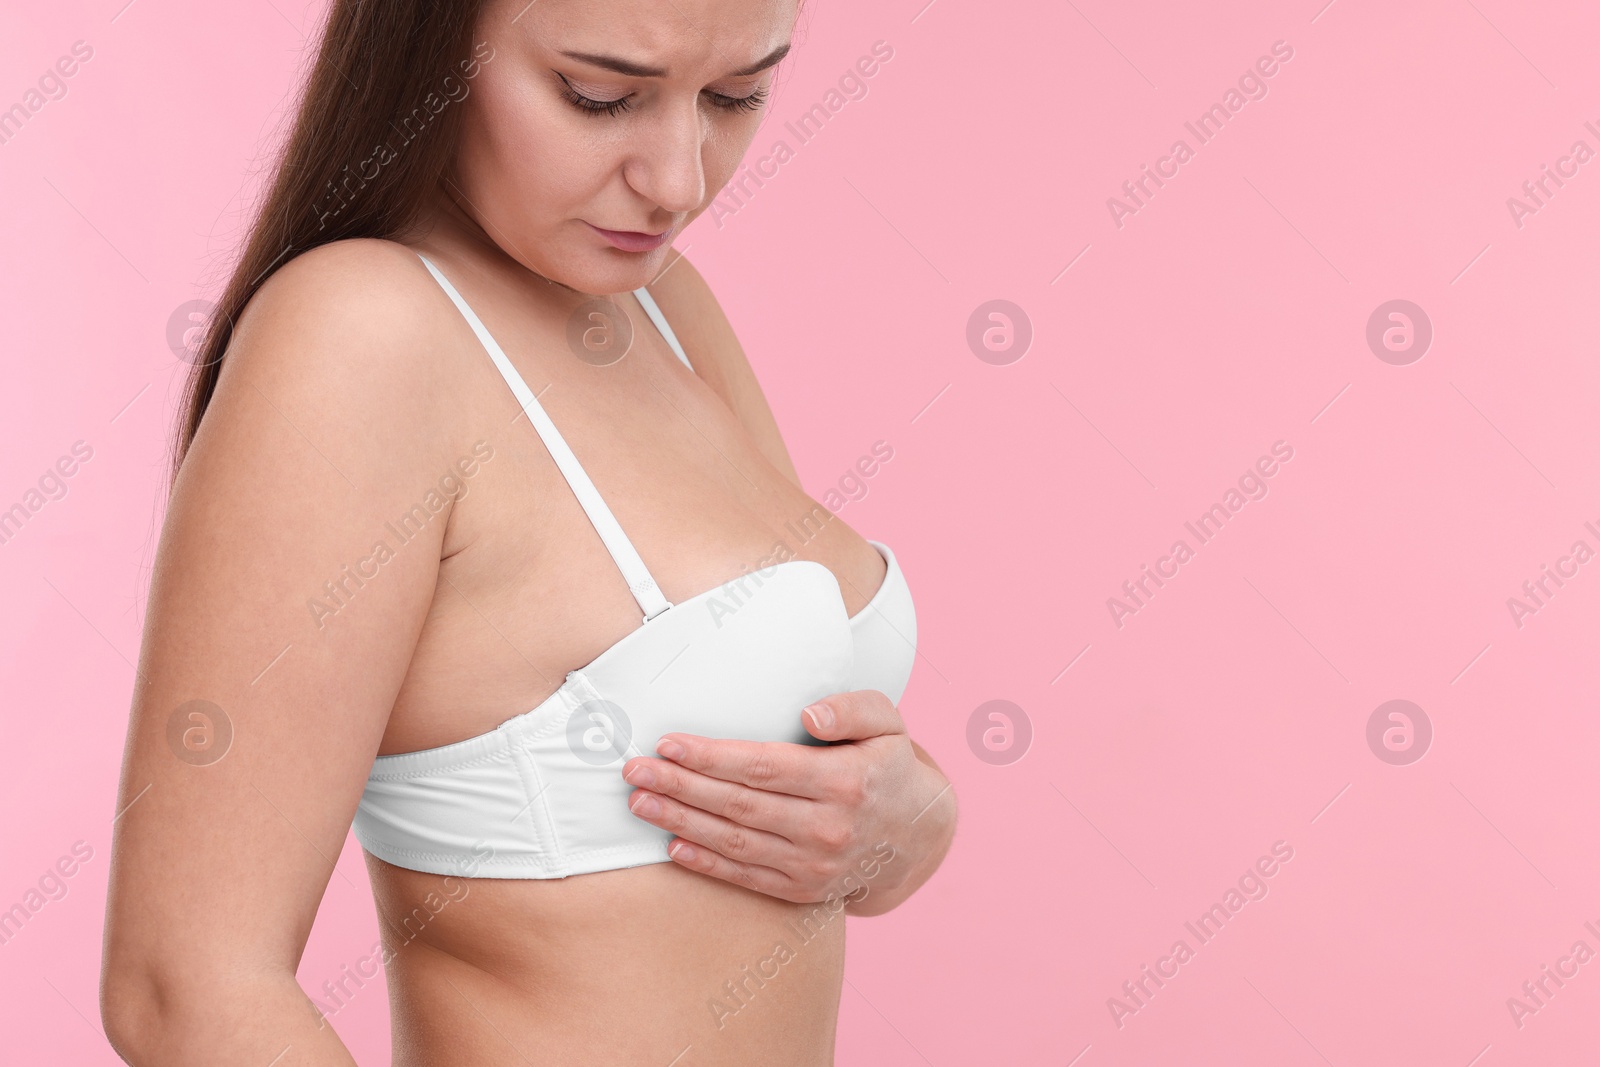 Photo of Mammology. Woman in bra doing breast self-examination on pink background, space for text